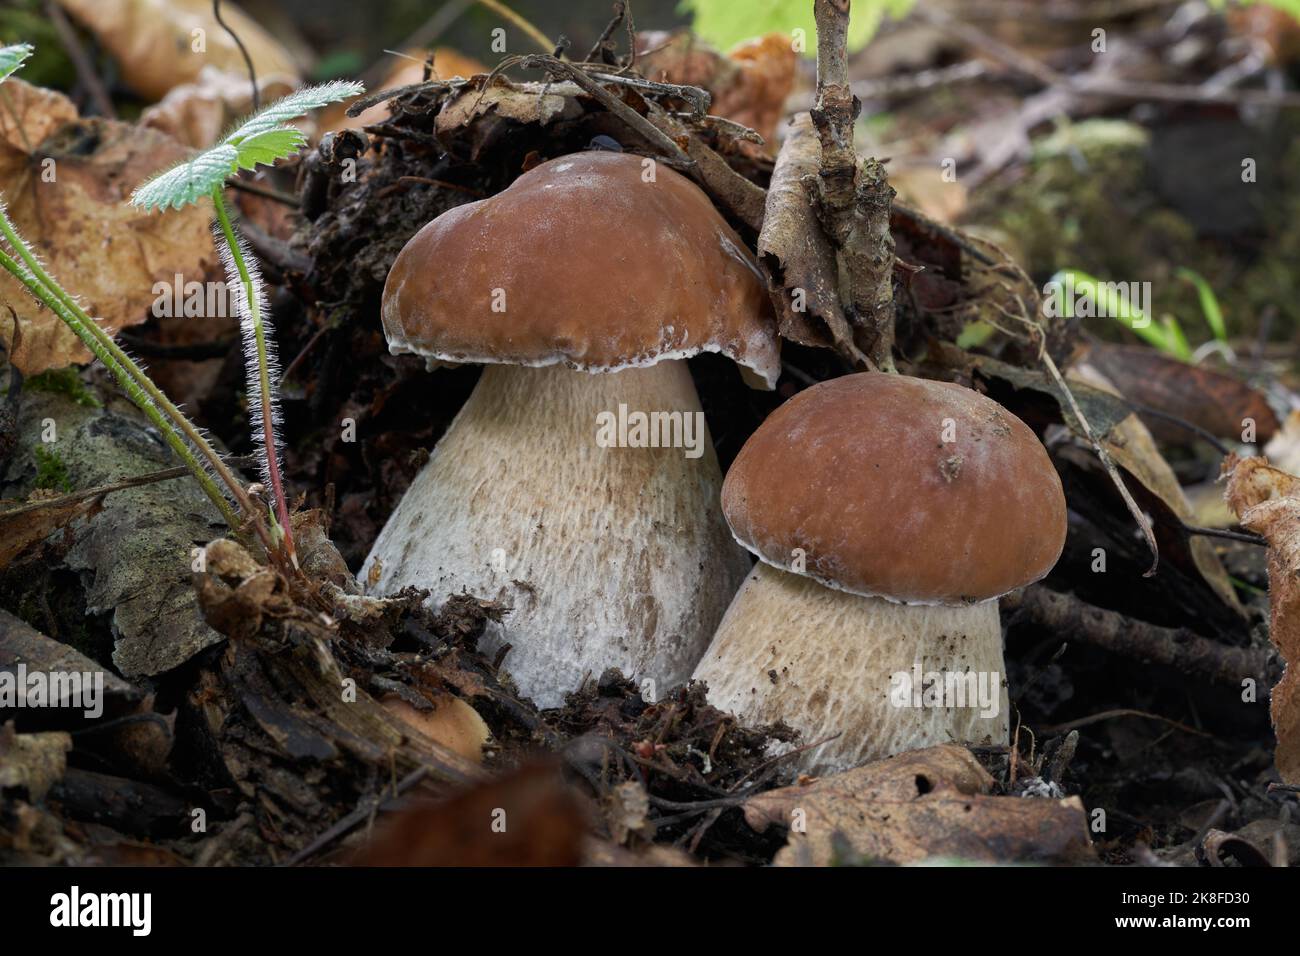 Two edible mushrooms Boletus edulis in the birch-spruce forest. Known as cep, penny bun, porcino or porcini. Wild mushrooms growing on the ground. Stock Photo